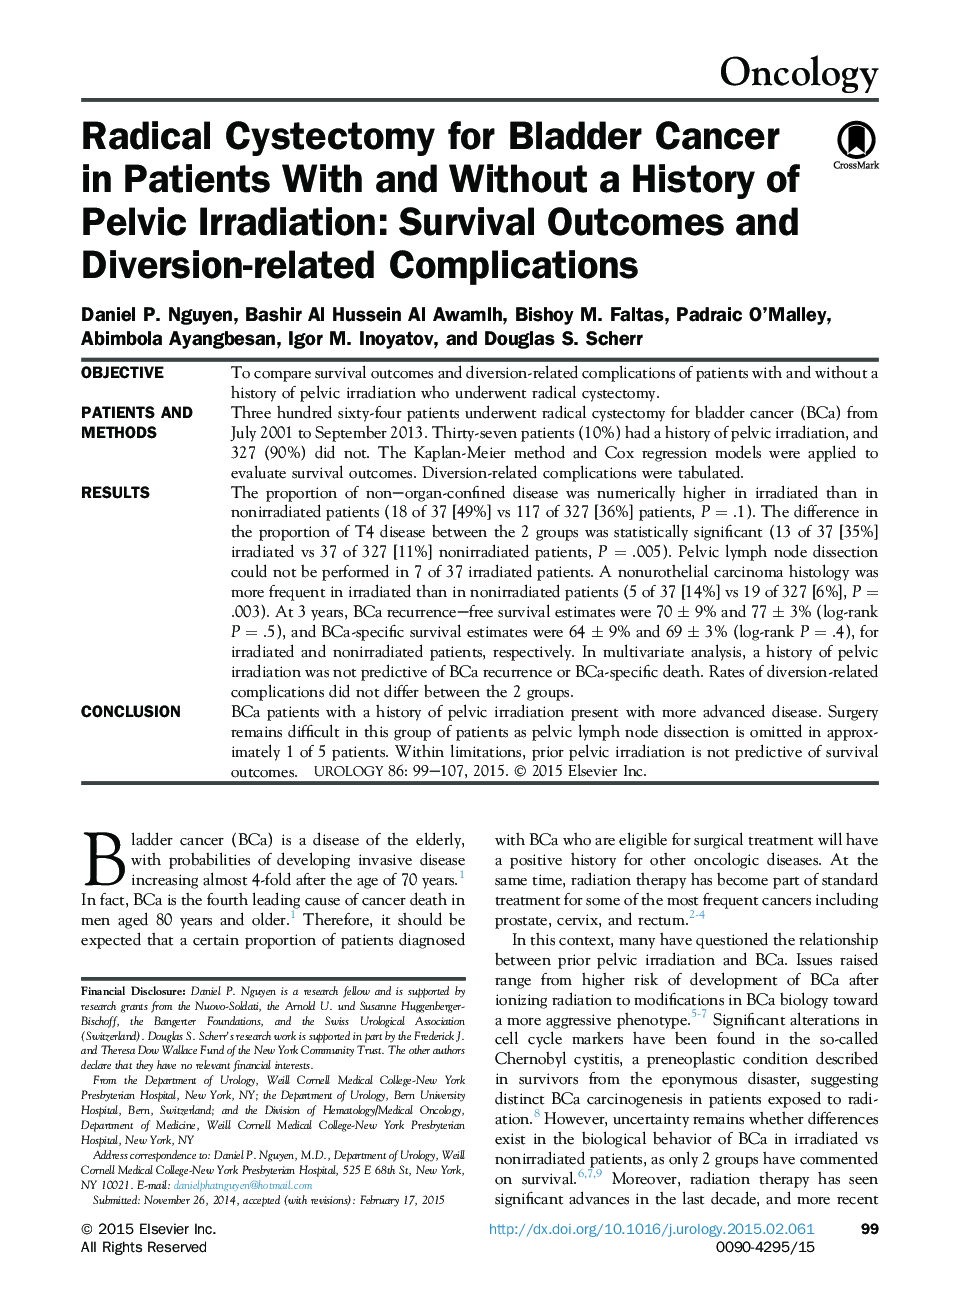 Radical Cystectomy for Bladder Cancer in Patients With and Without a History of Pelvic Irradiation: Survival Outcomes and Diversion-related Complications 